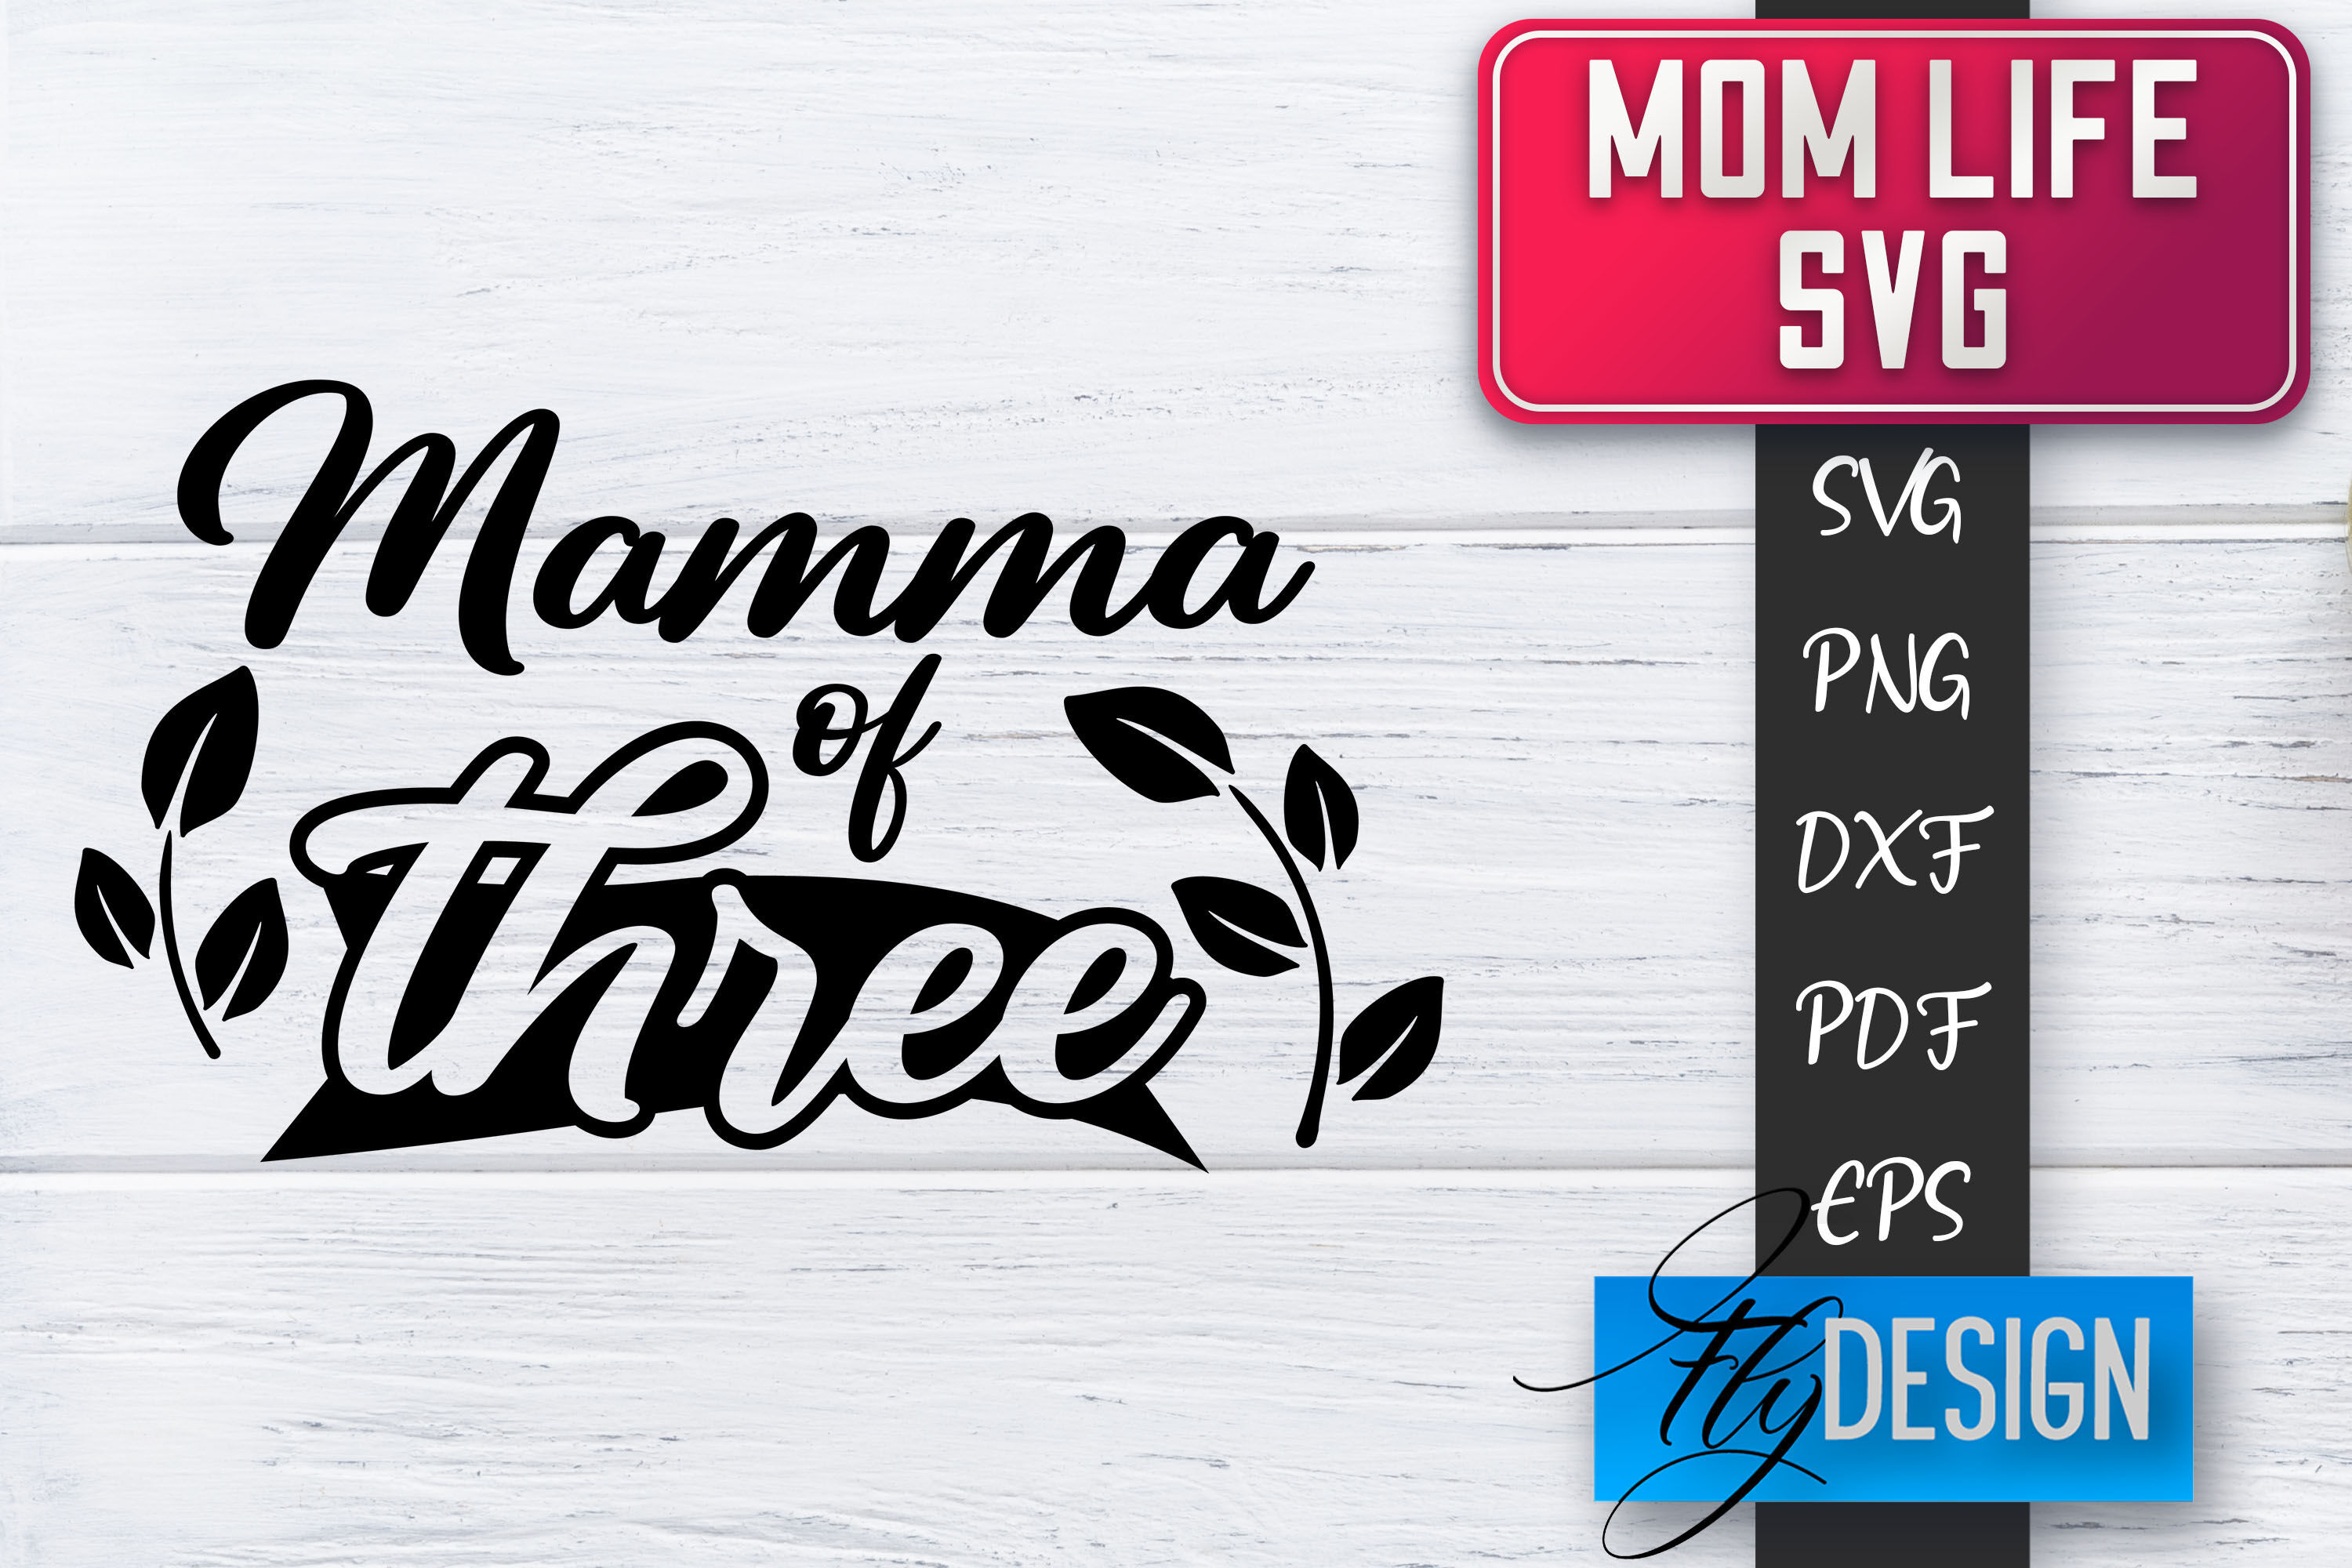 Mom Life SVG | Mother Quotes SVG | Mum Sayings SVG By Fly Design ...